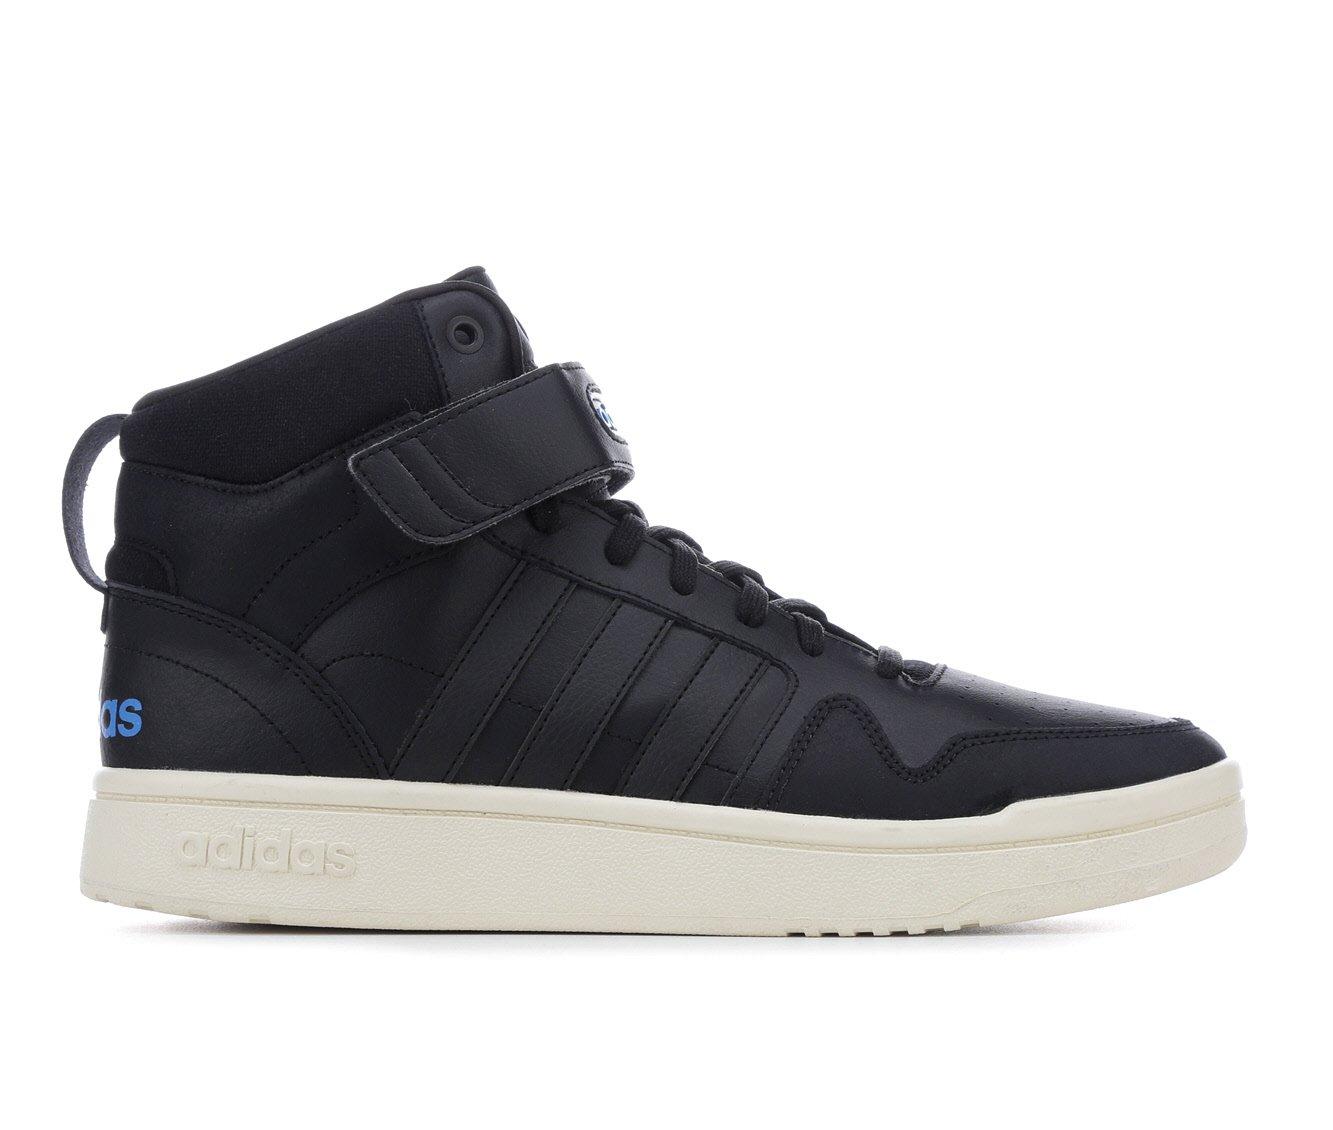 Men's Adidas Post Move Mid Sneakers | Shoe Carnival